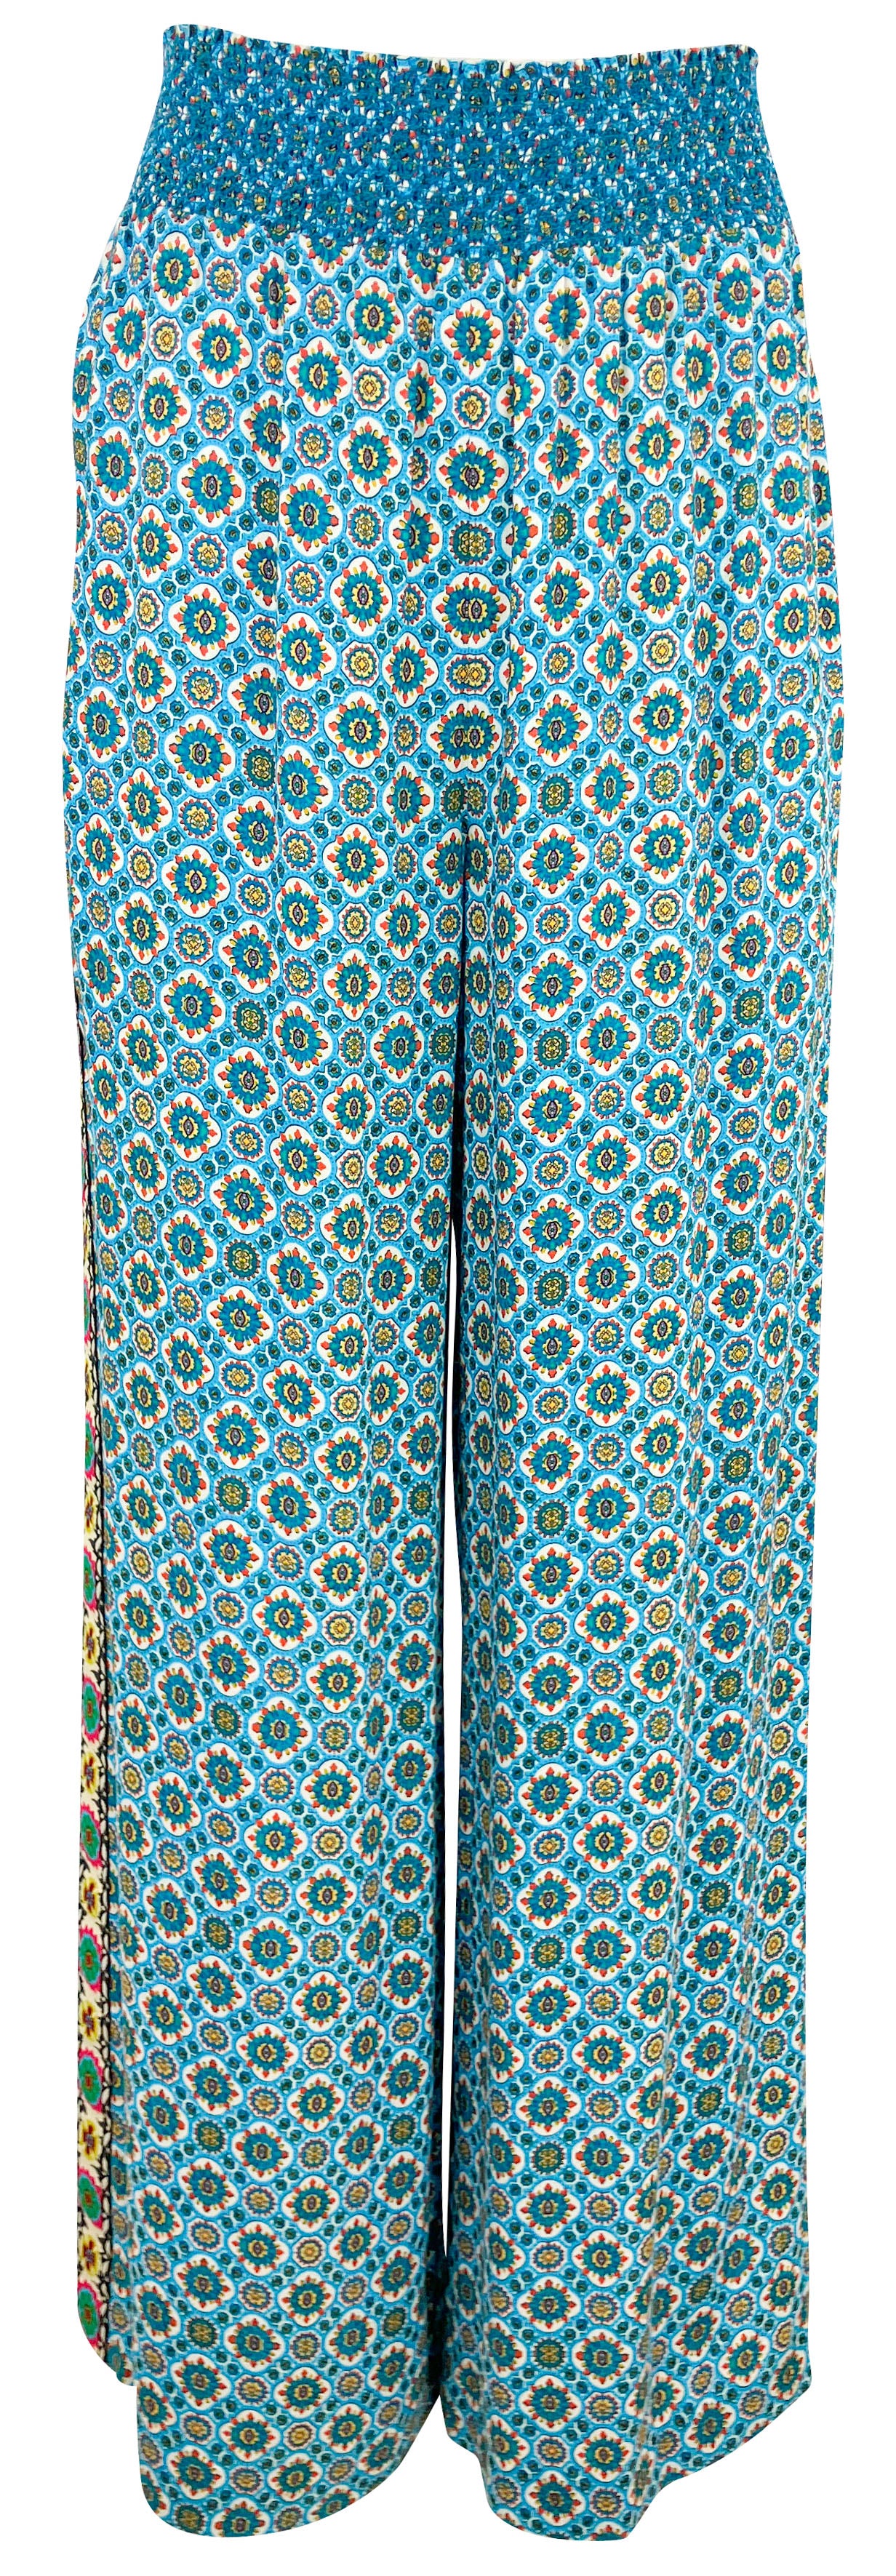 Alice + Olivia Russell Pants in Washed Geo - Discounts on Alice + Olivia at UAL